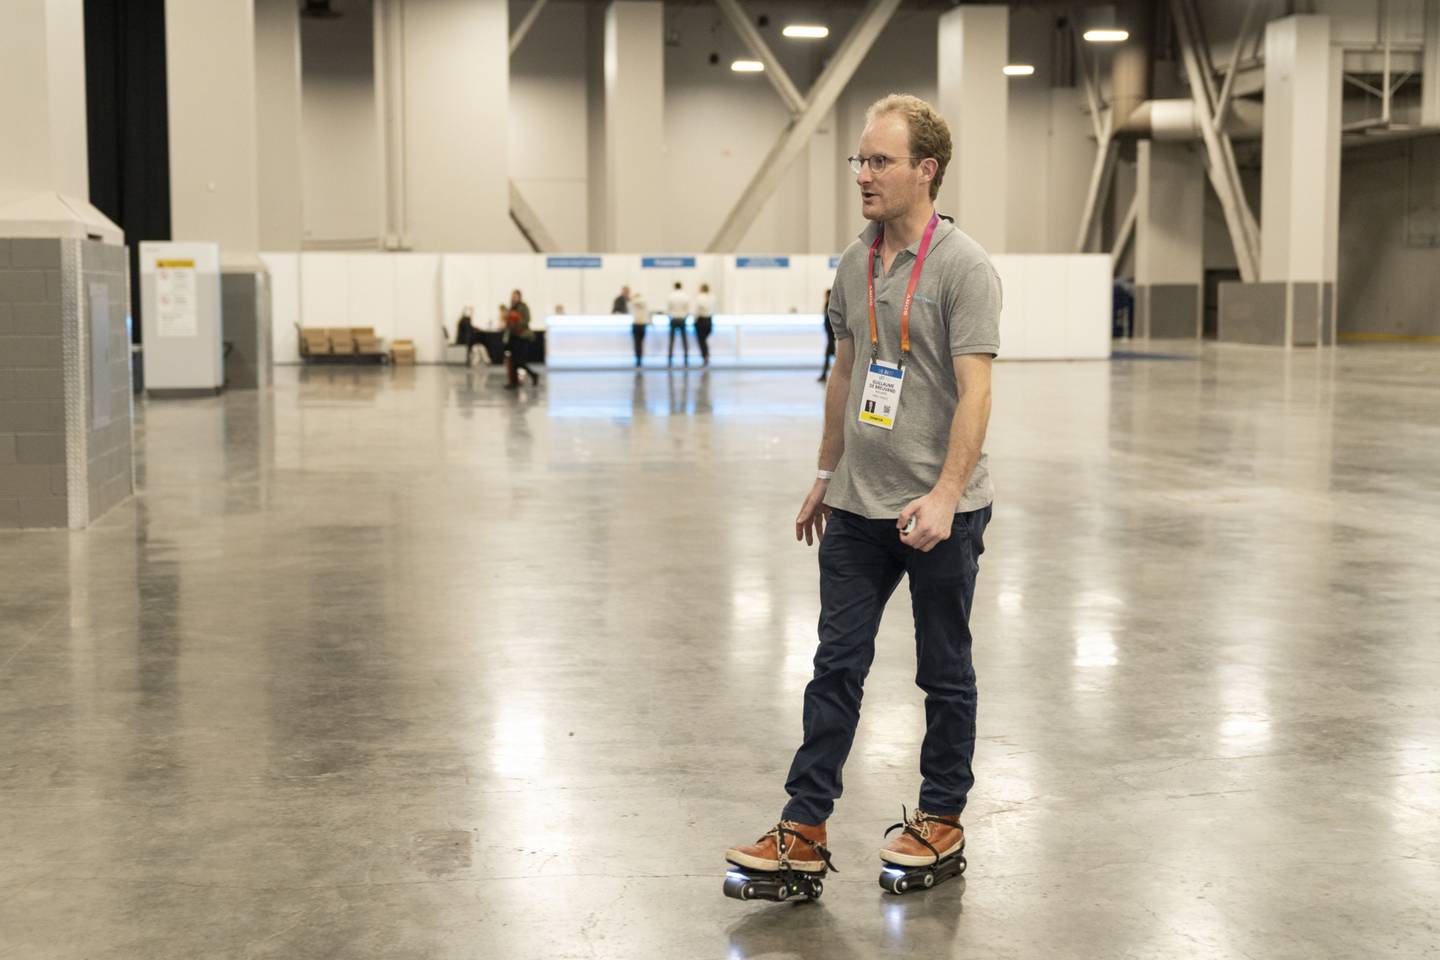 An electronic roller-skating device by Rollkers is tested during the CES 2023 Unveiled event in Las Vegas. Bloomberg